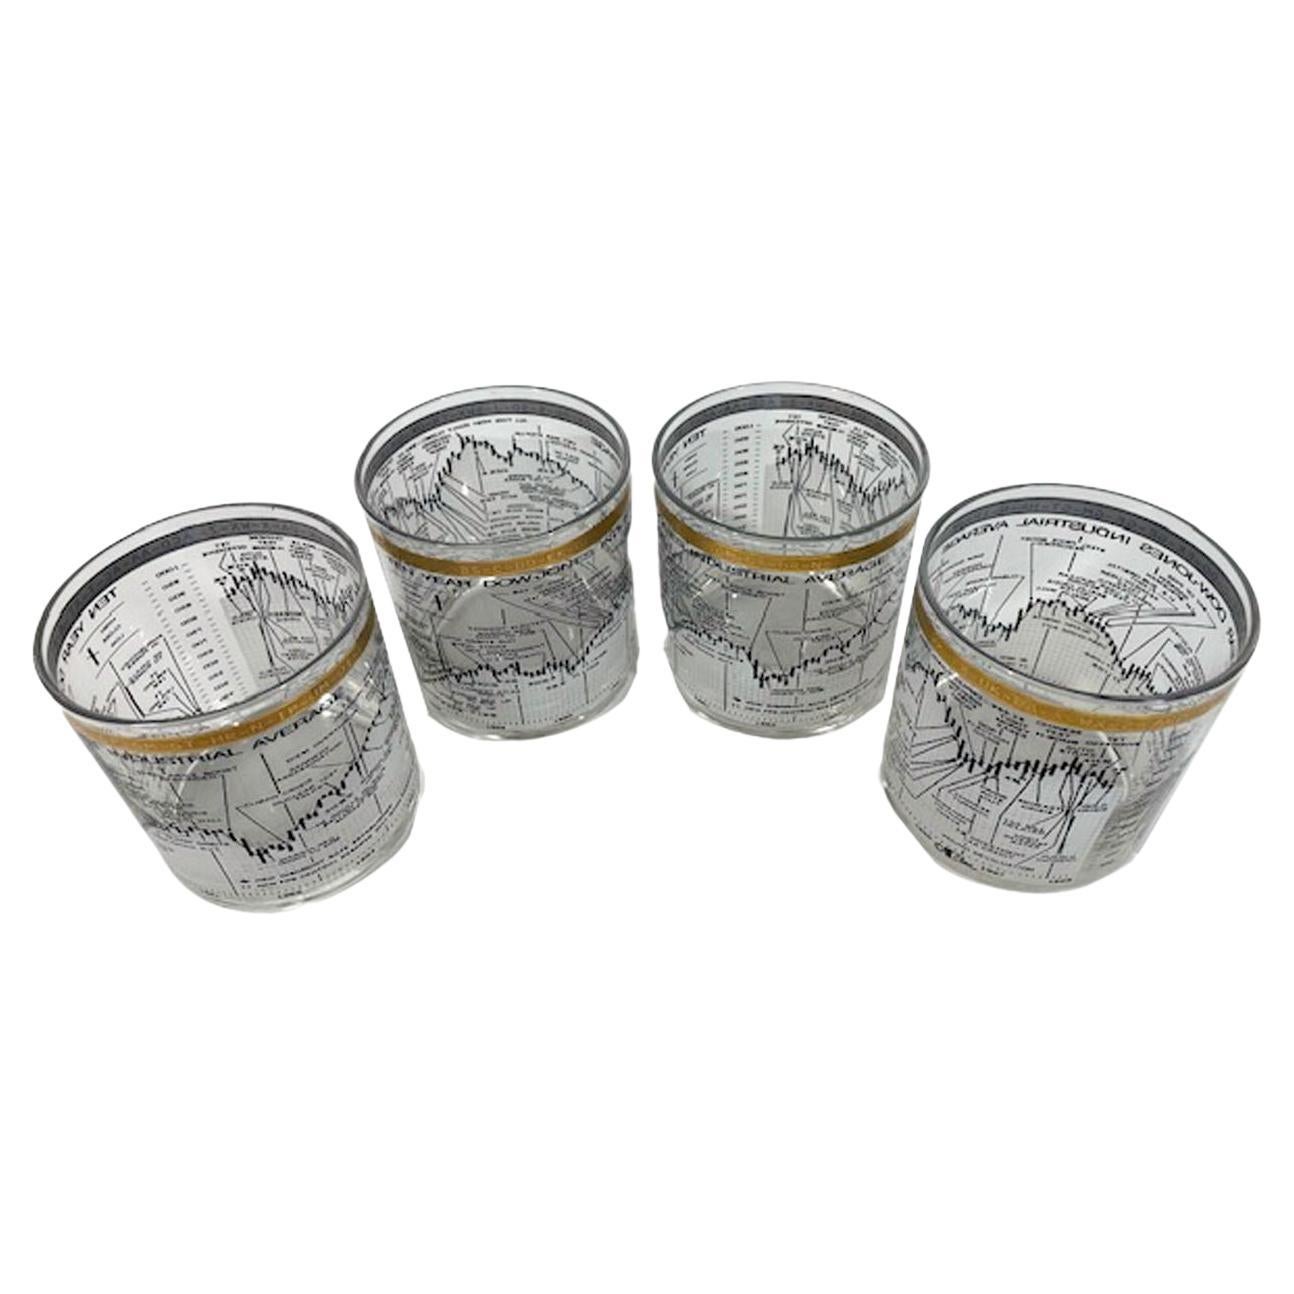 Four Cera Ten Year Dow-Jones Industrial Average Cocktail Glasses For 1958-1968